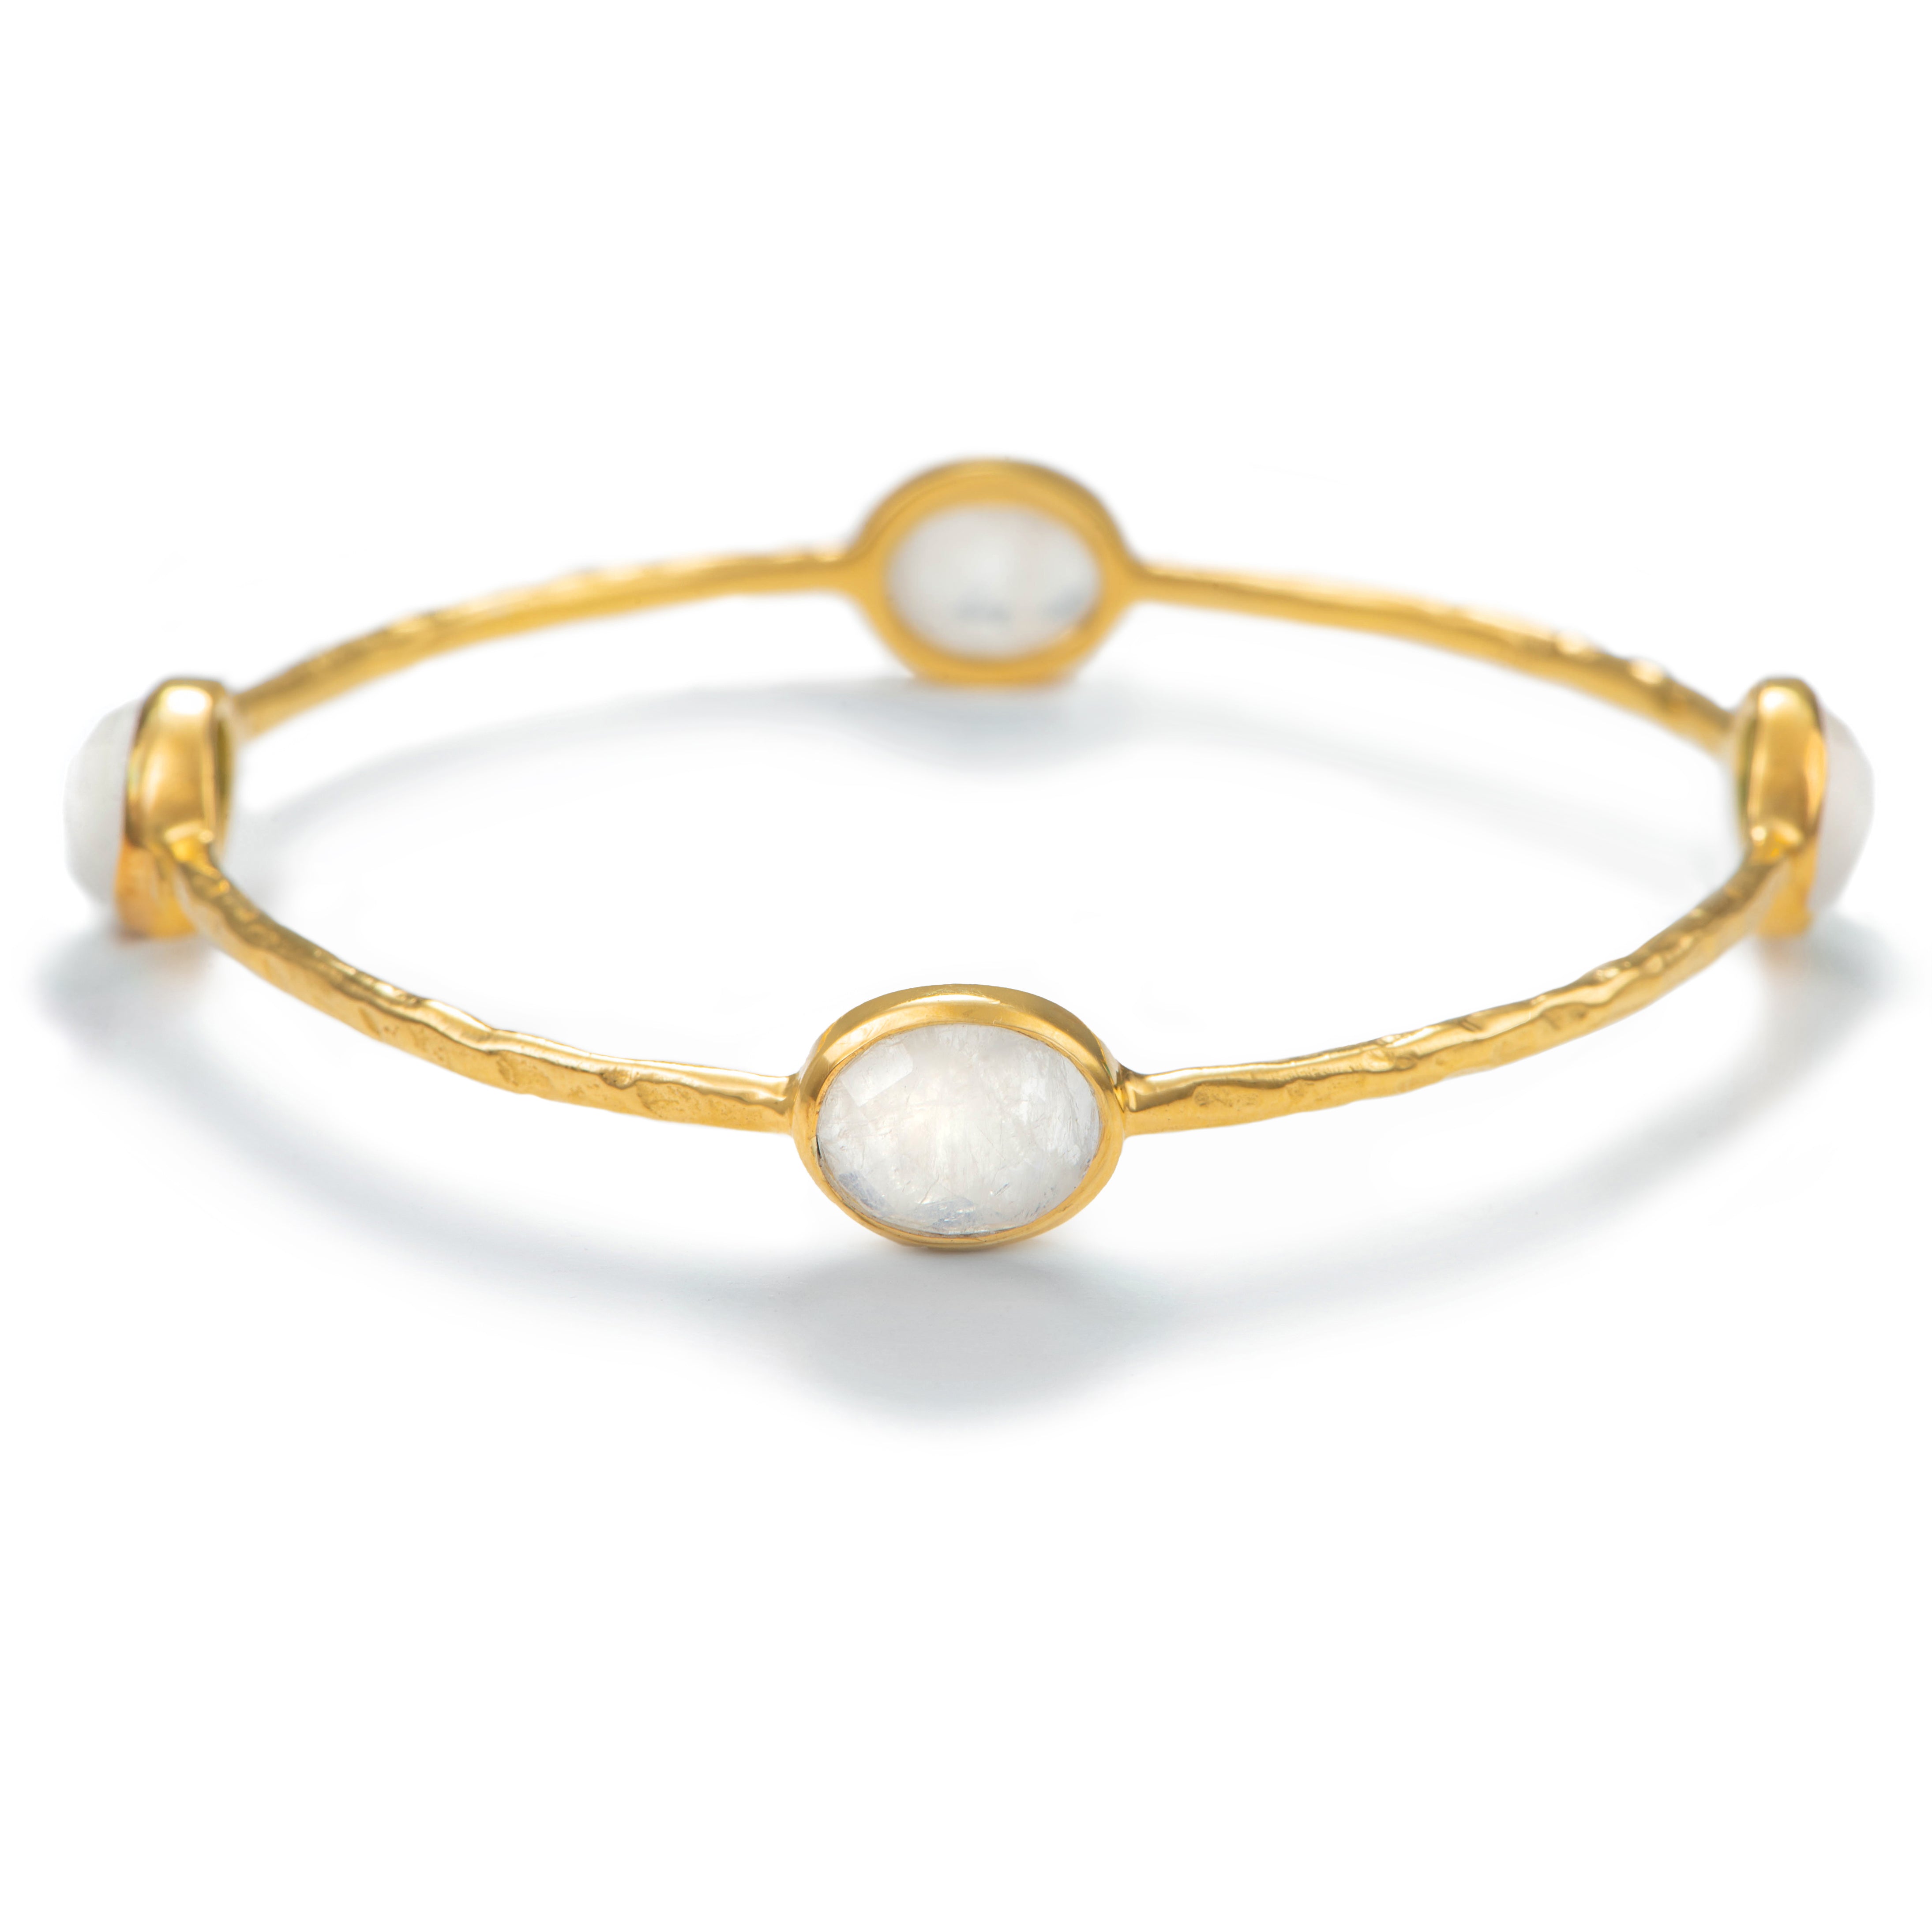 Moonstone Gemstone Bangle in Gold Plated Sterling Silver